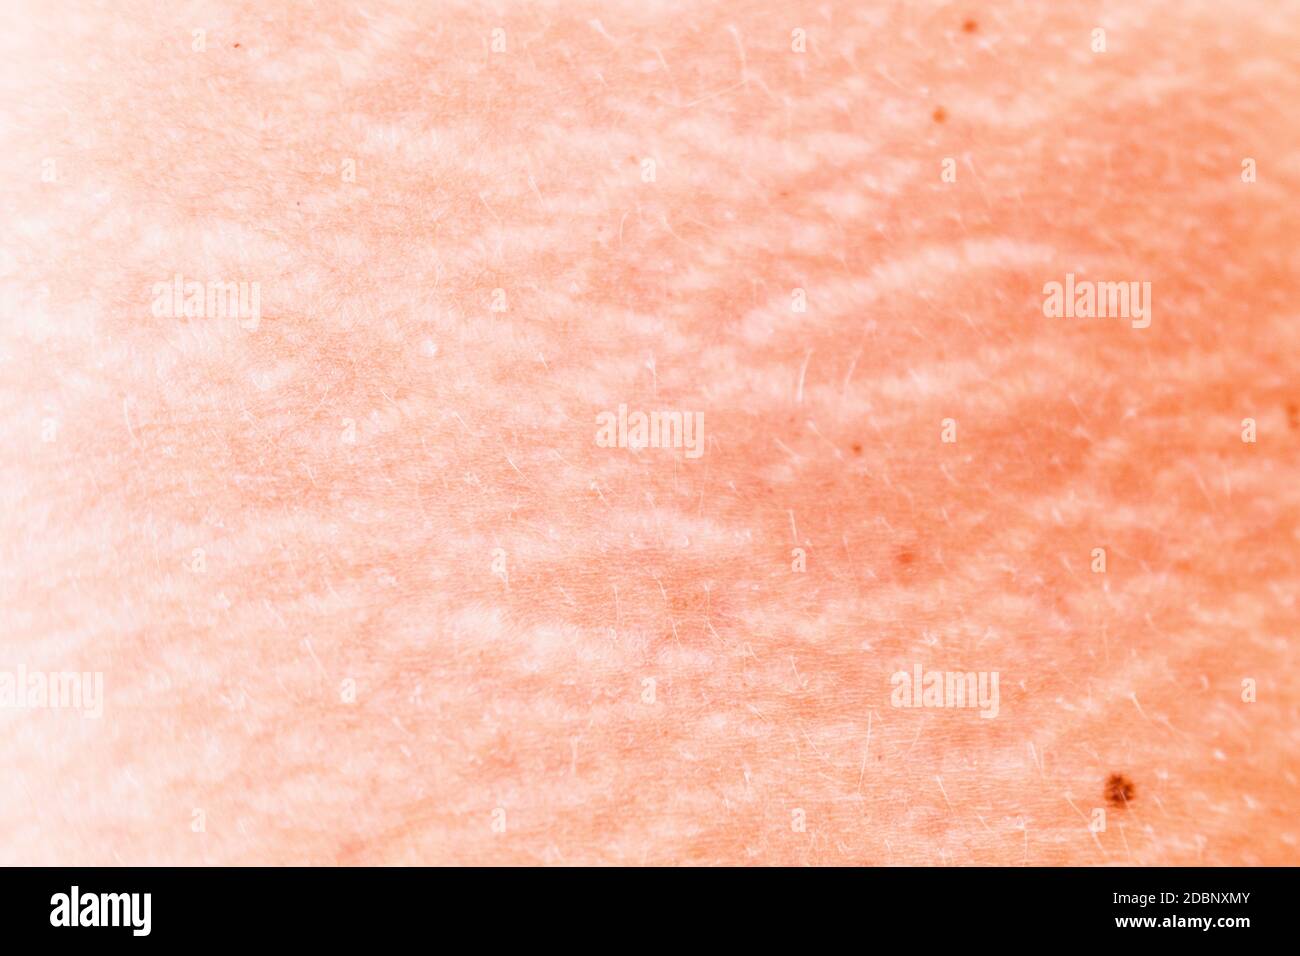 Stretch marks on the skin of a middle-aged woman, detail. Stock Photo